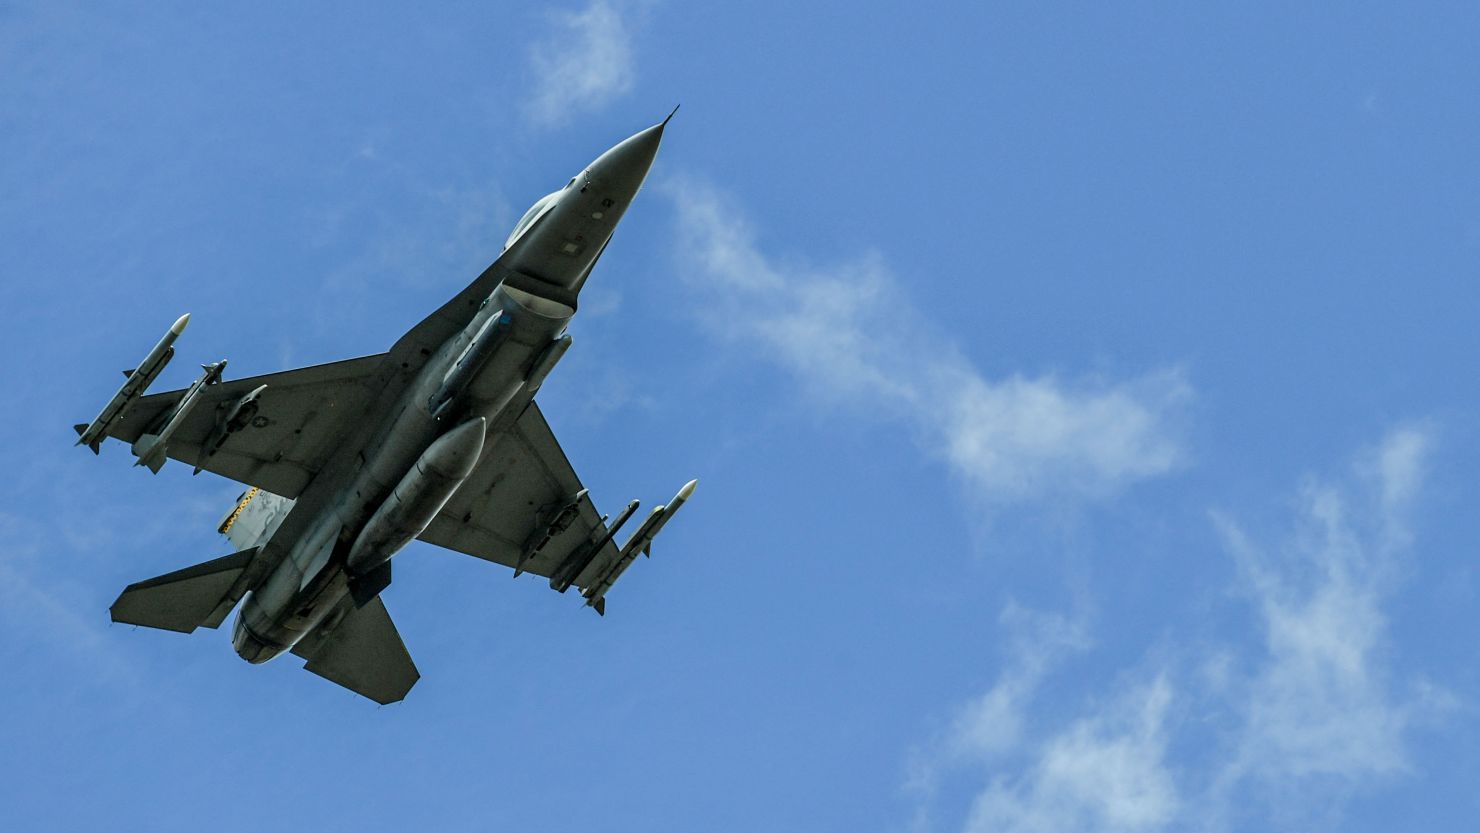 A US Air Force F-16 aircraft flies near the Rionegro Airport during military drills between the Colombia and the United States Air Forces in Rionegro, Antioquia department, Colombia on July 12, 2021. (Photo by JOAQUIN SARMIENTO / AFP) (Photo by JOAQUIN SARMIENTO/AFP via Getty Images)